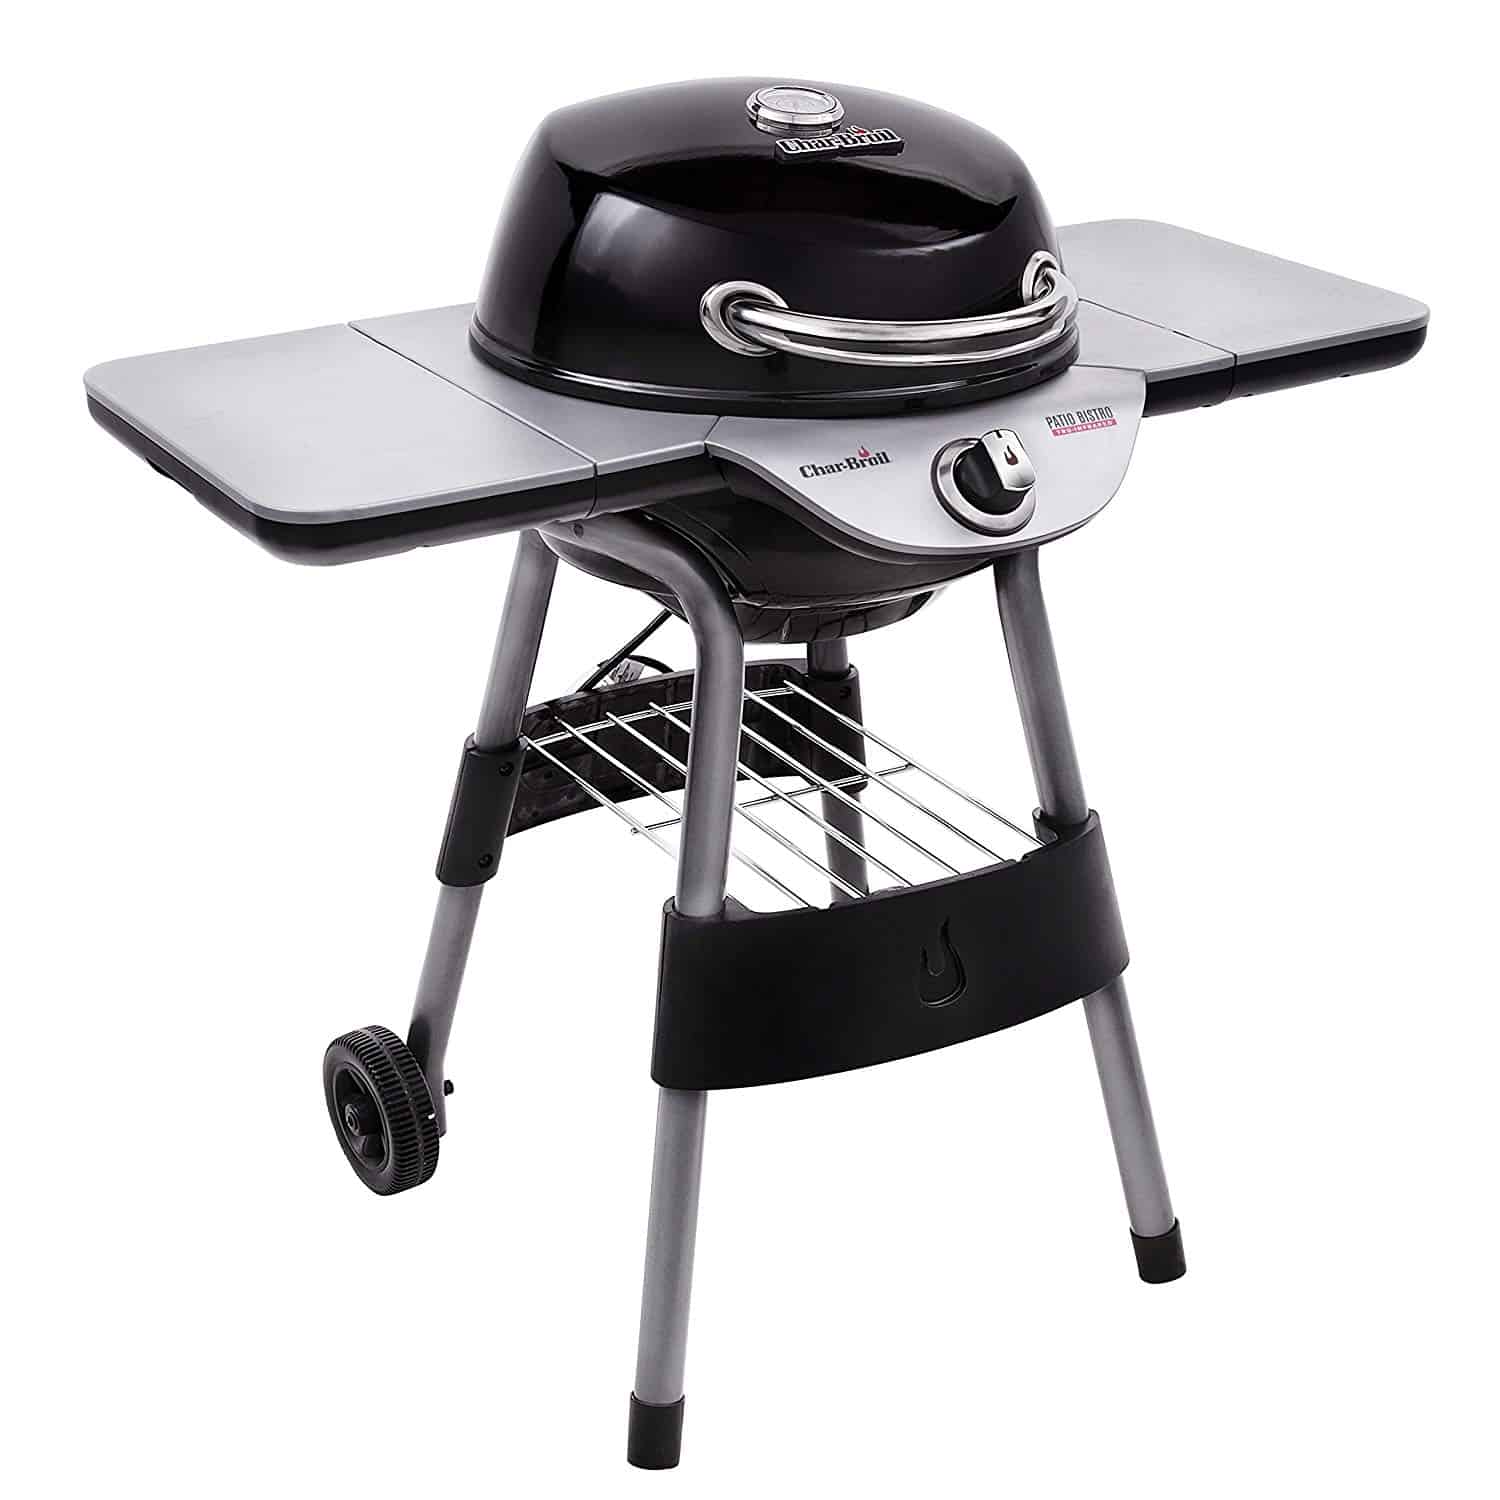 Char-Broil TRU Patio Bistro 240 best electric infrared grill